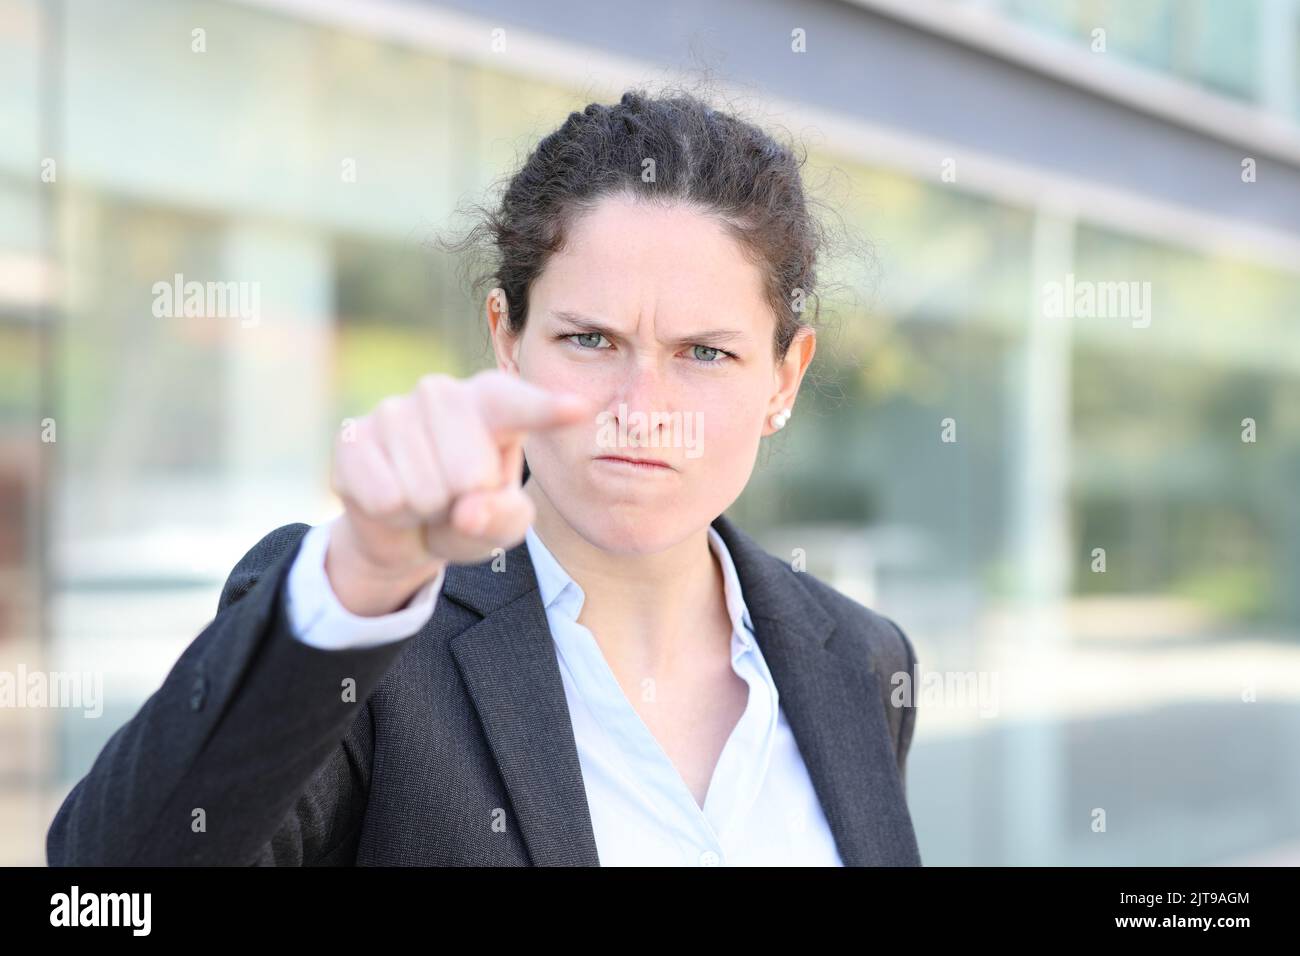 Front view portrait of an angry businesswoman accussing pointing you in the street Stock Photo